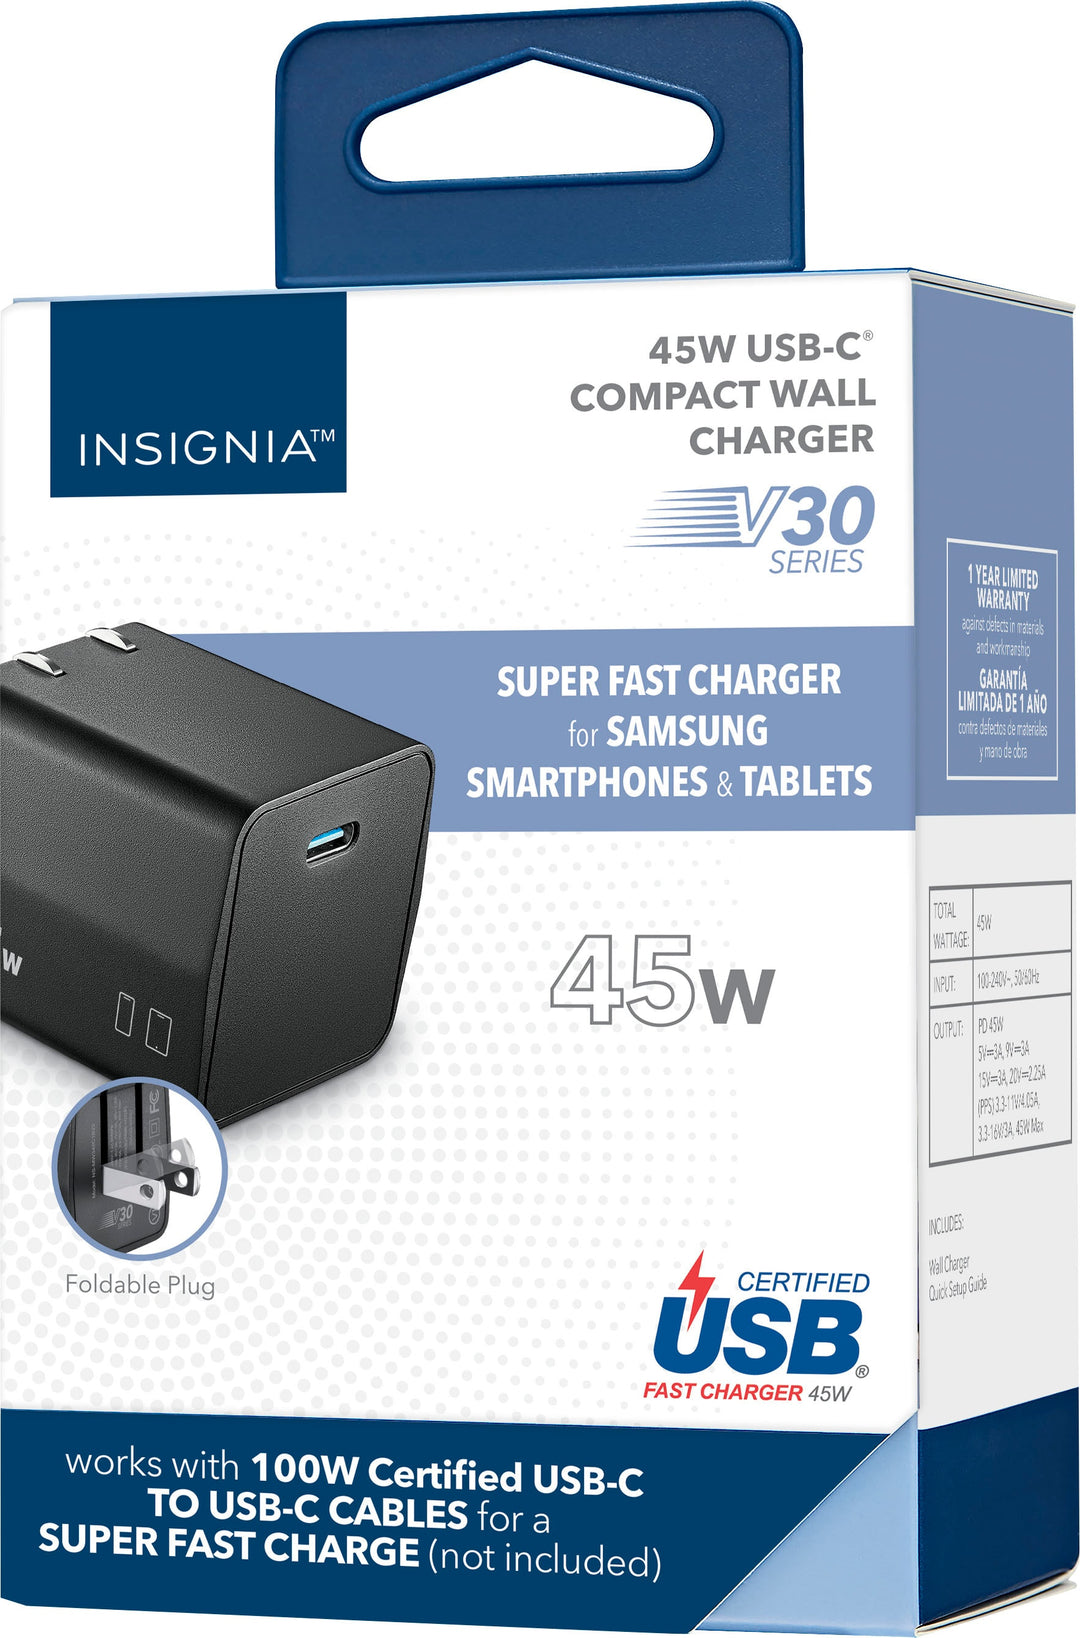 Insignia™ - 45W USB-C Compact Wall Charger for Samsung Smartphones & Tablets - Black_1